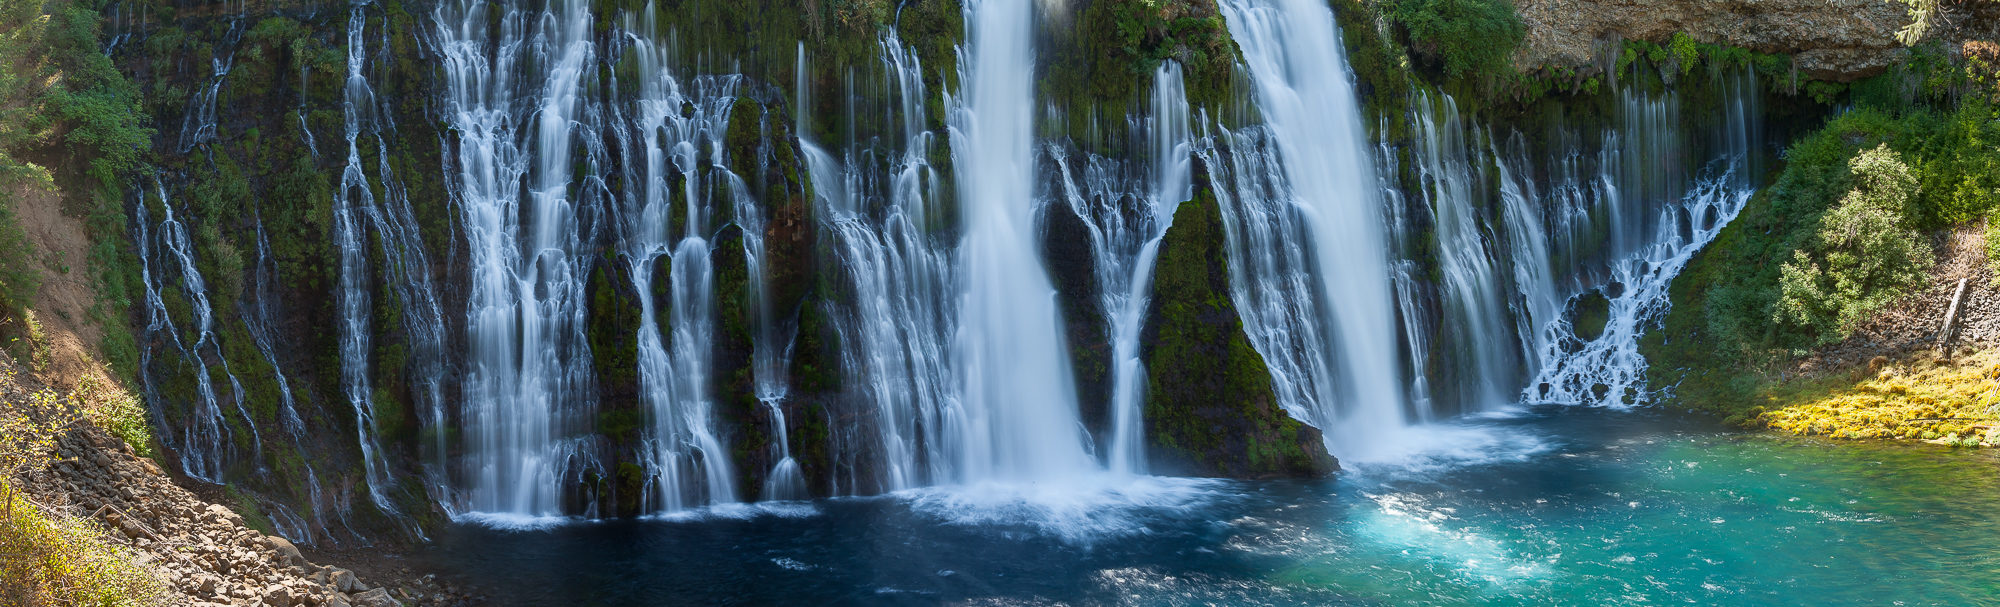 Burney Falls drops across a wide cliff into a pool below, creating a tree-lined grotto.